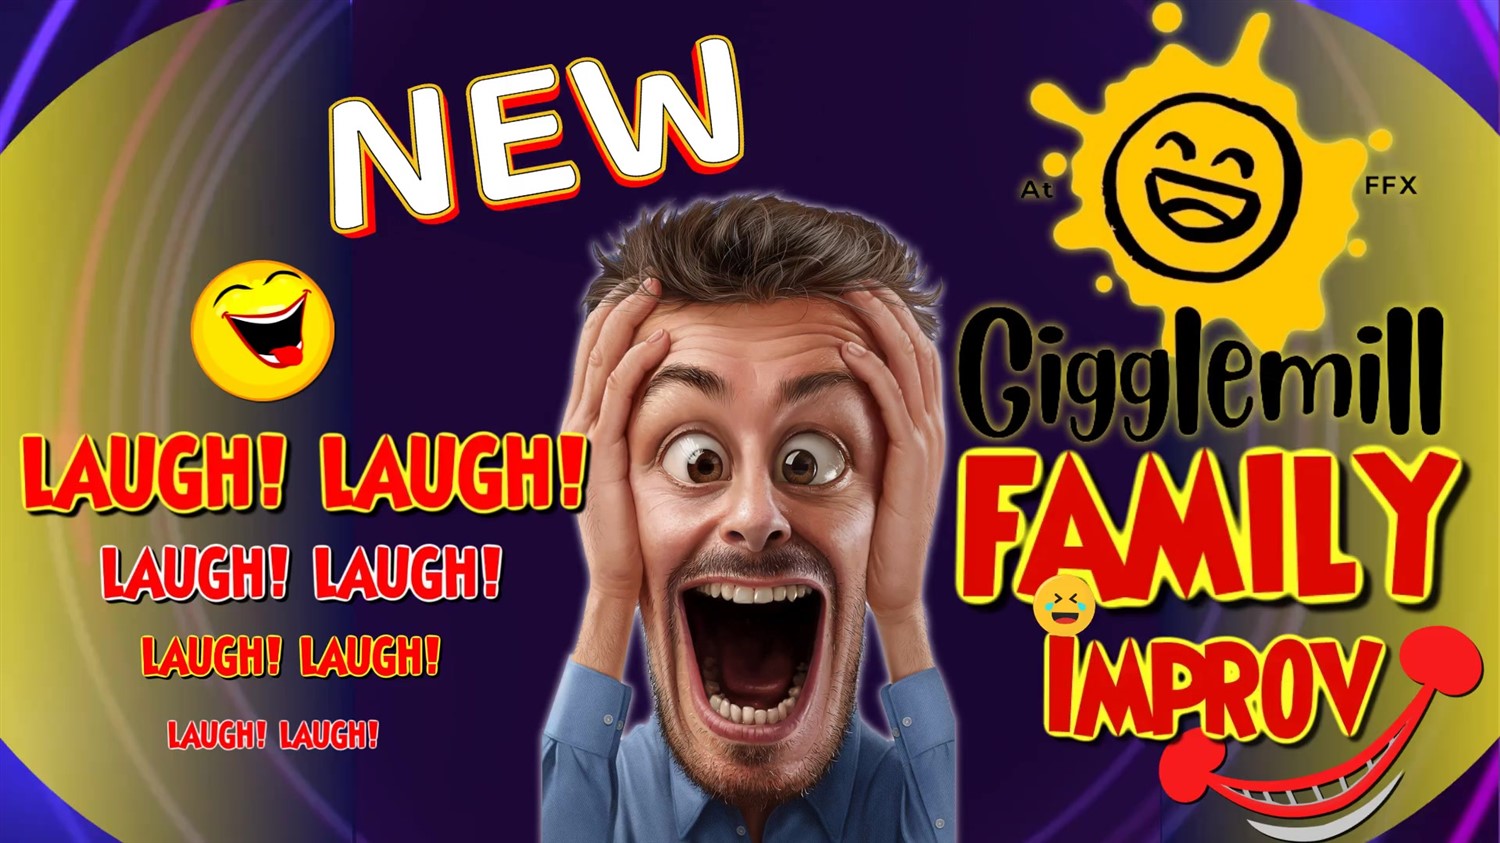 GIGGLEMILL - FAMILY IMPROV SHOW Whose fun is it anyway? Yours! on Jun 08, 19:00@FFX Theatre - Pick a seat, Buy tickets and Get information on Family Fun Xperience tickets.ffxshow.org